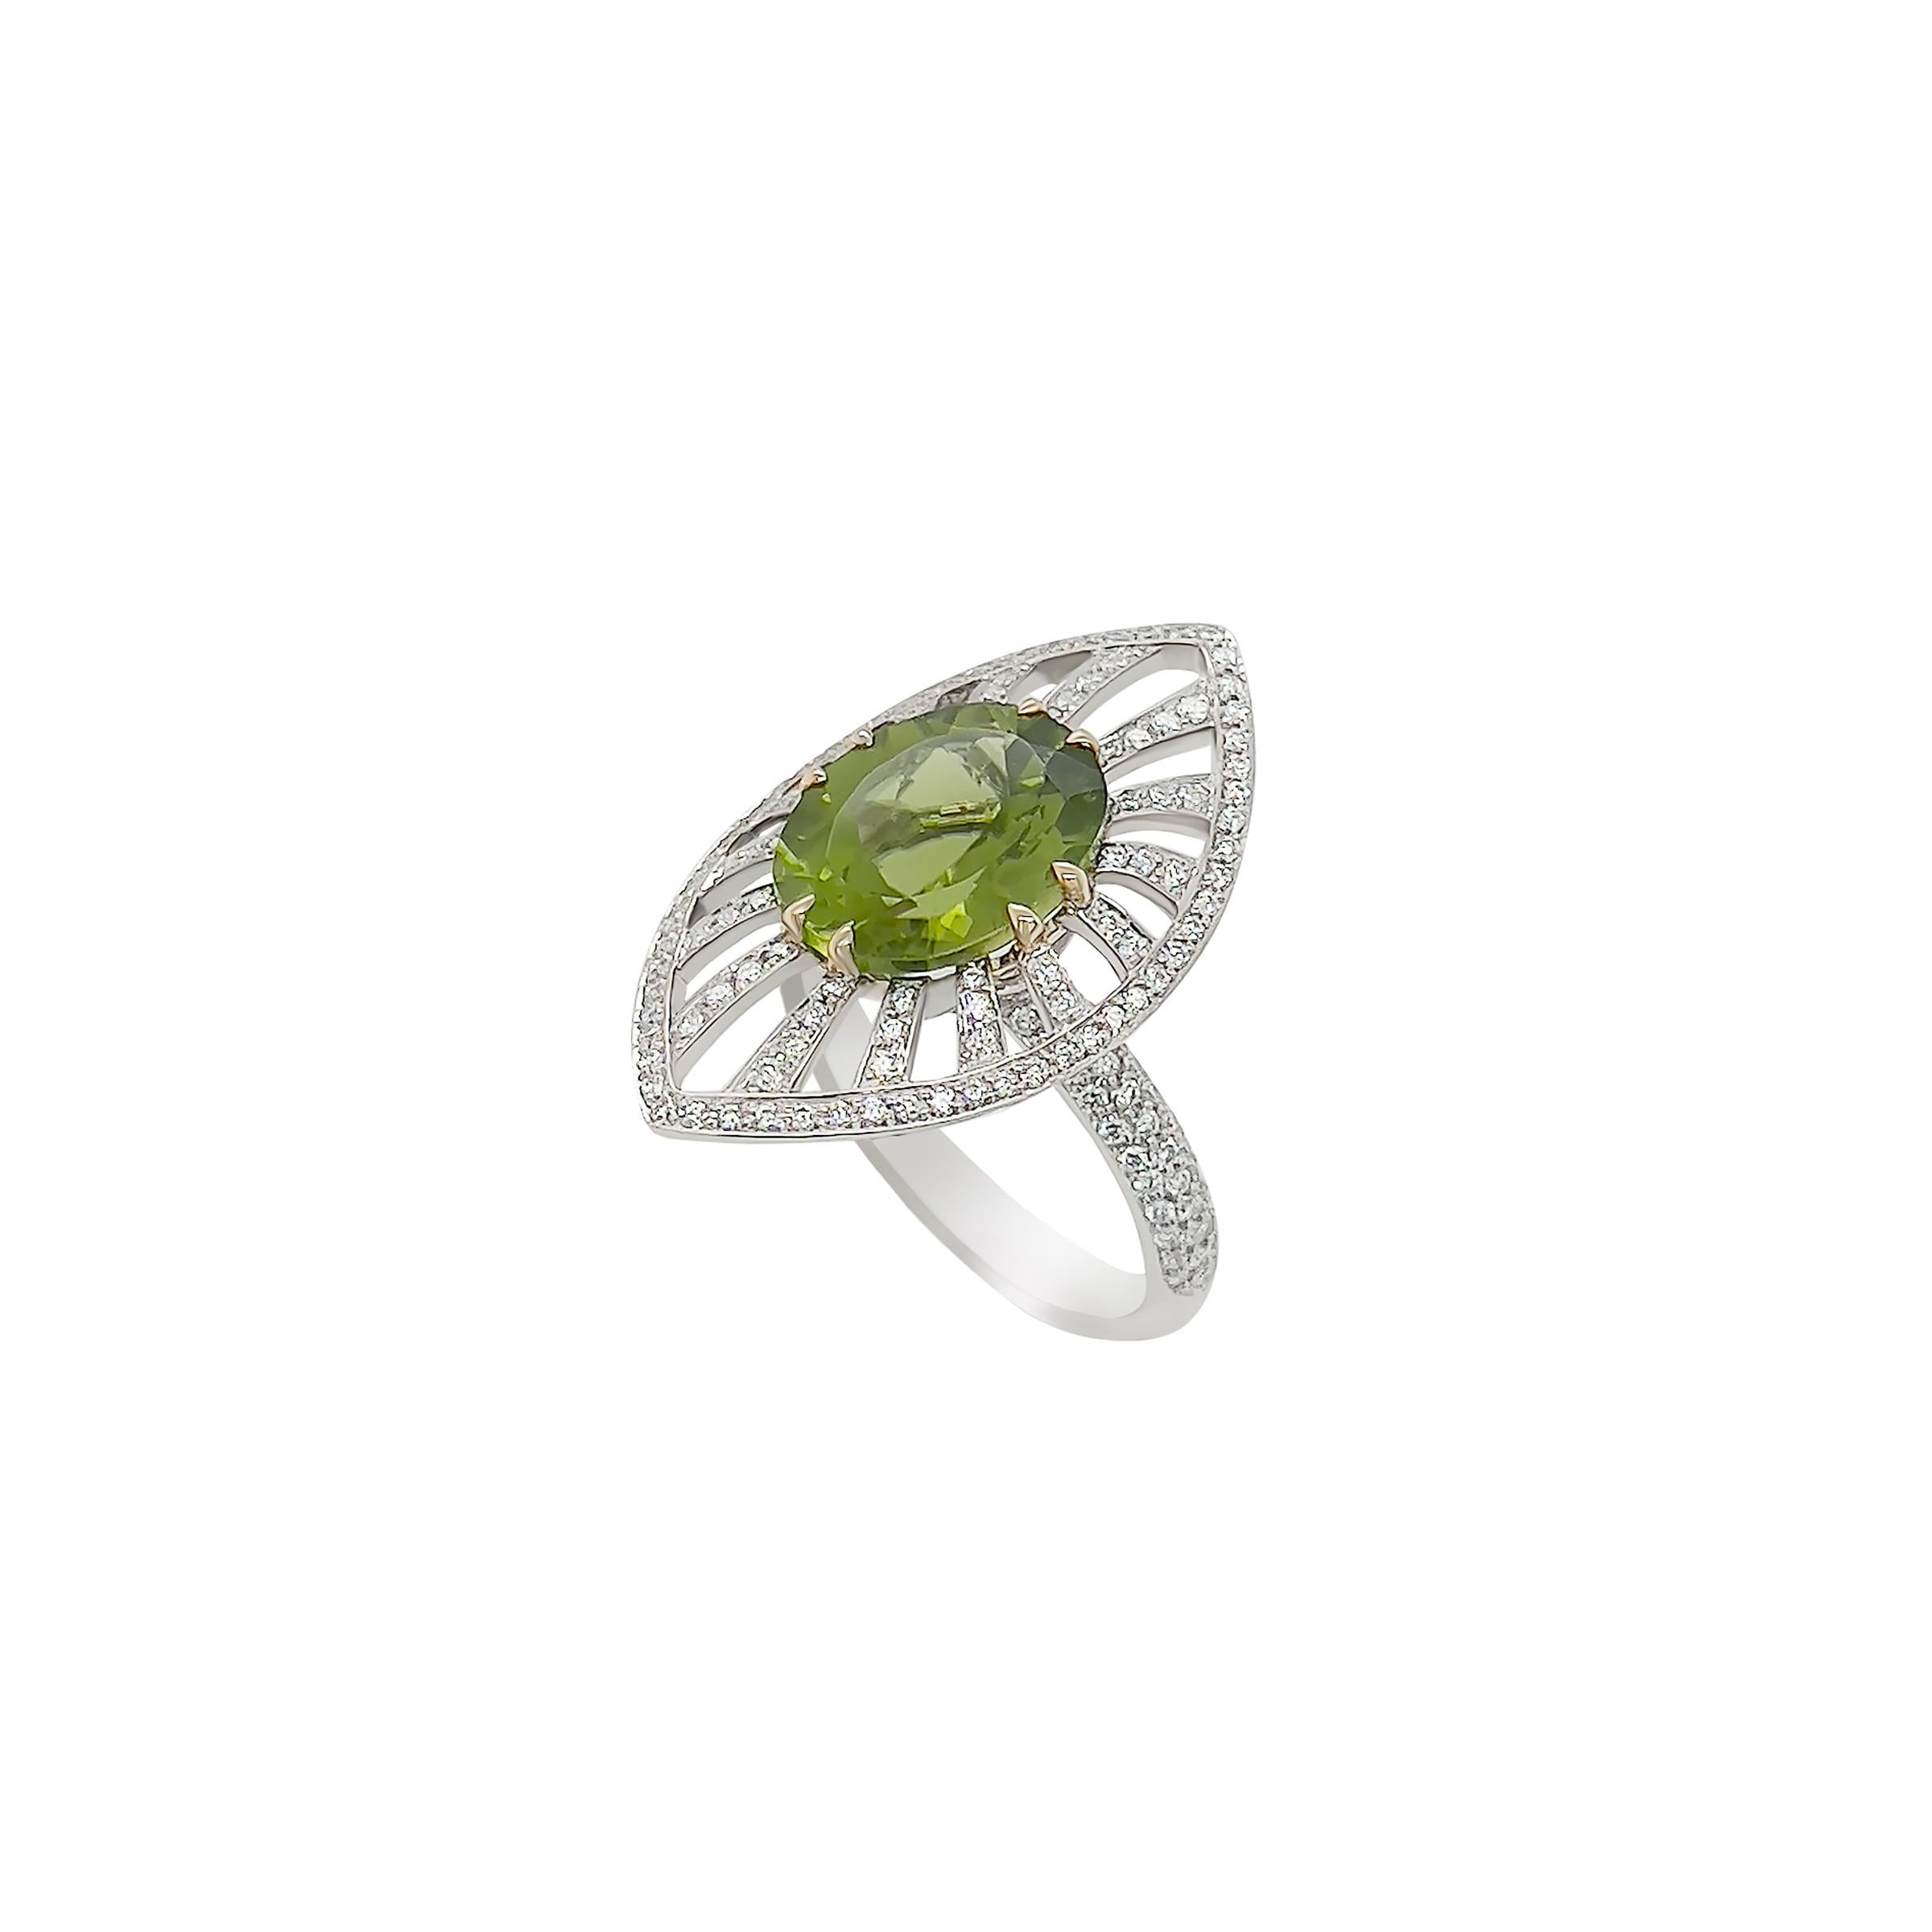 This sparkling 5.15ct oval peridot is a natural completely eye clean stone. The vivid green peridot is paired with a white diamond shield. The diamonds are high quality G VS color for the most brilliance. 

Thing ring is a part of a set with